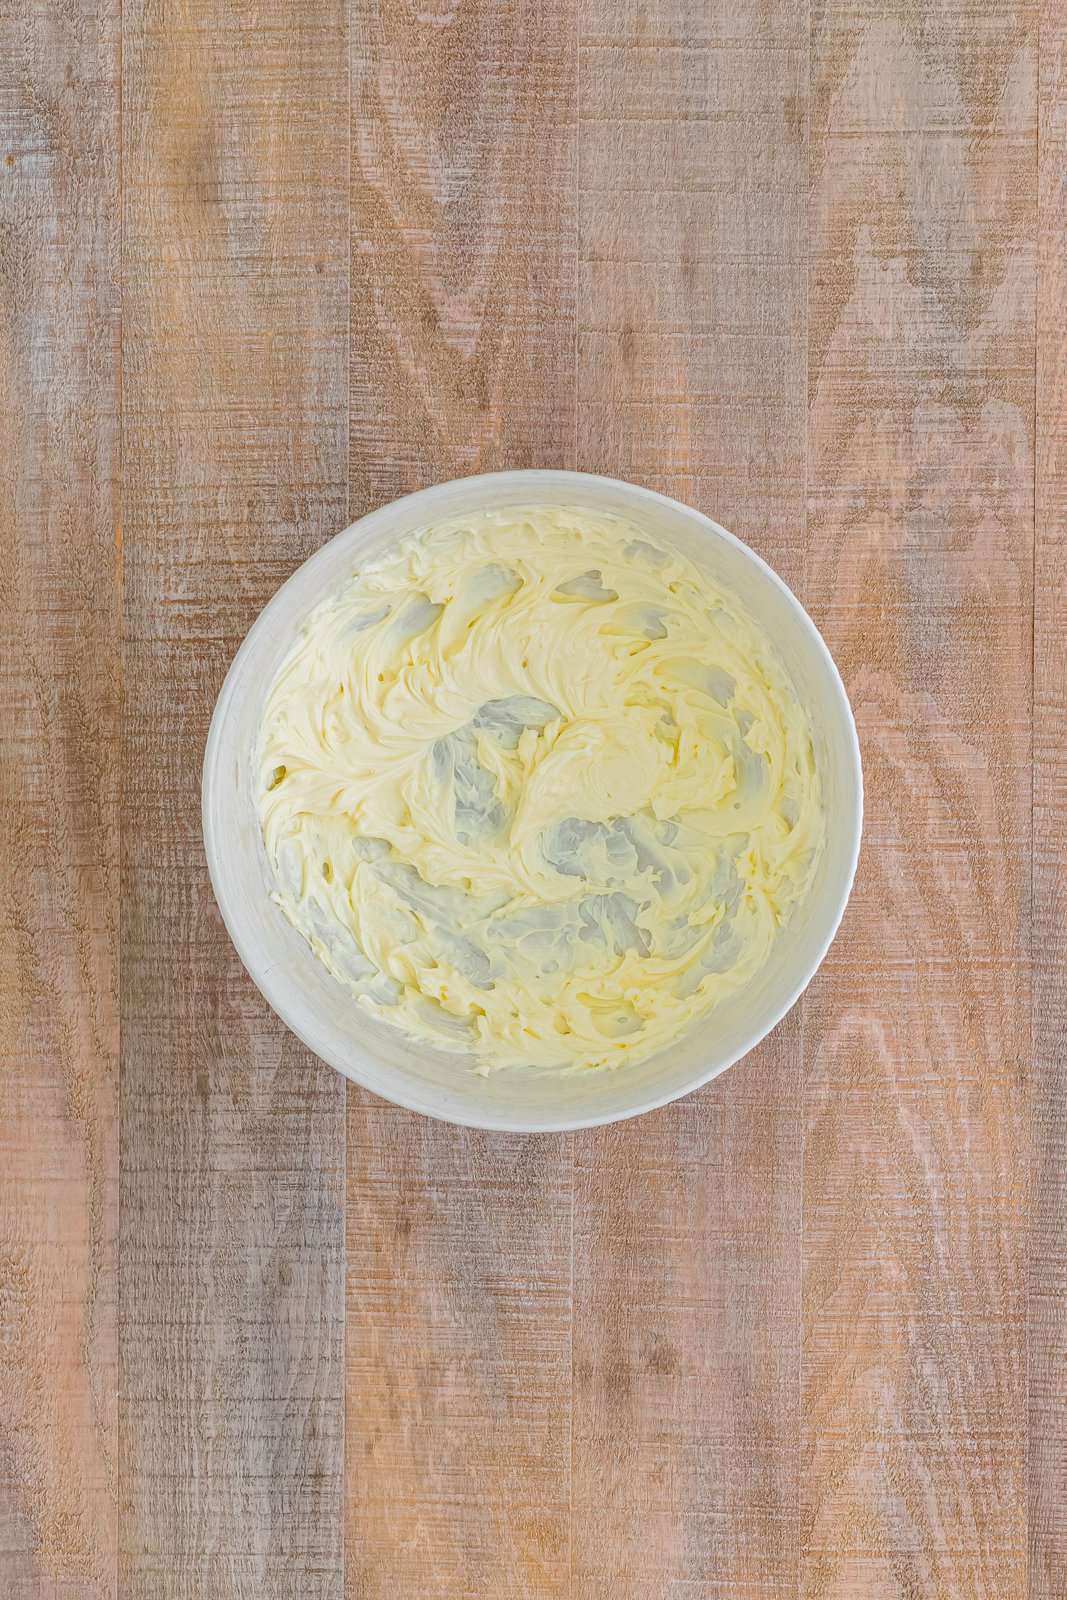 Whipped cream cheese in a bowl.